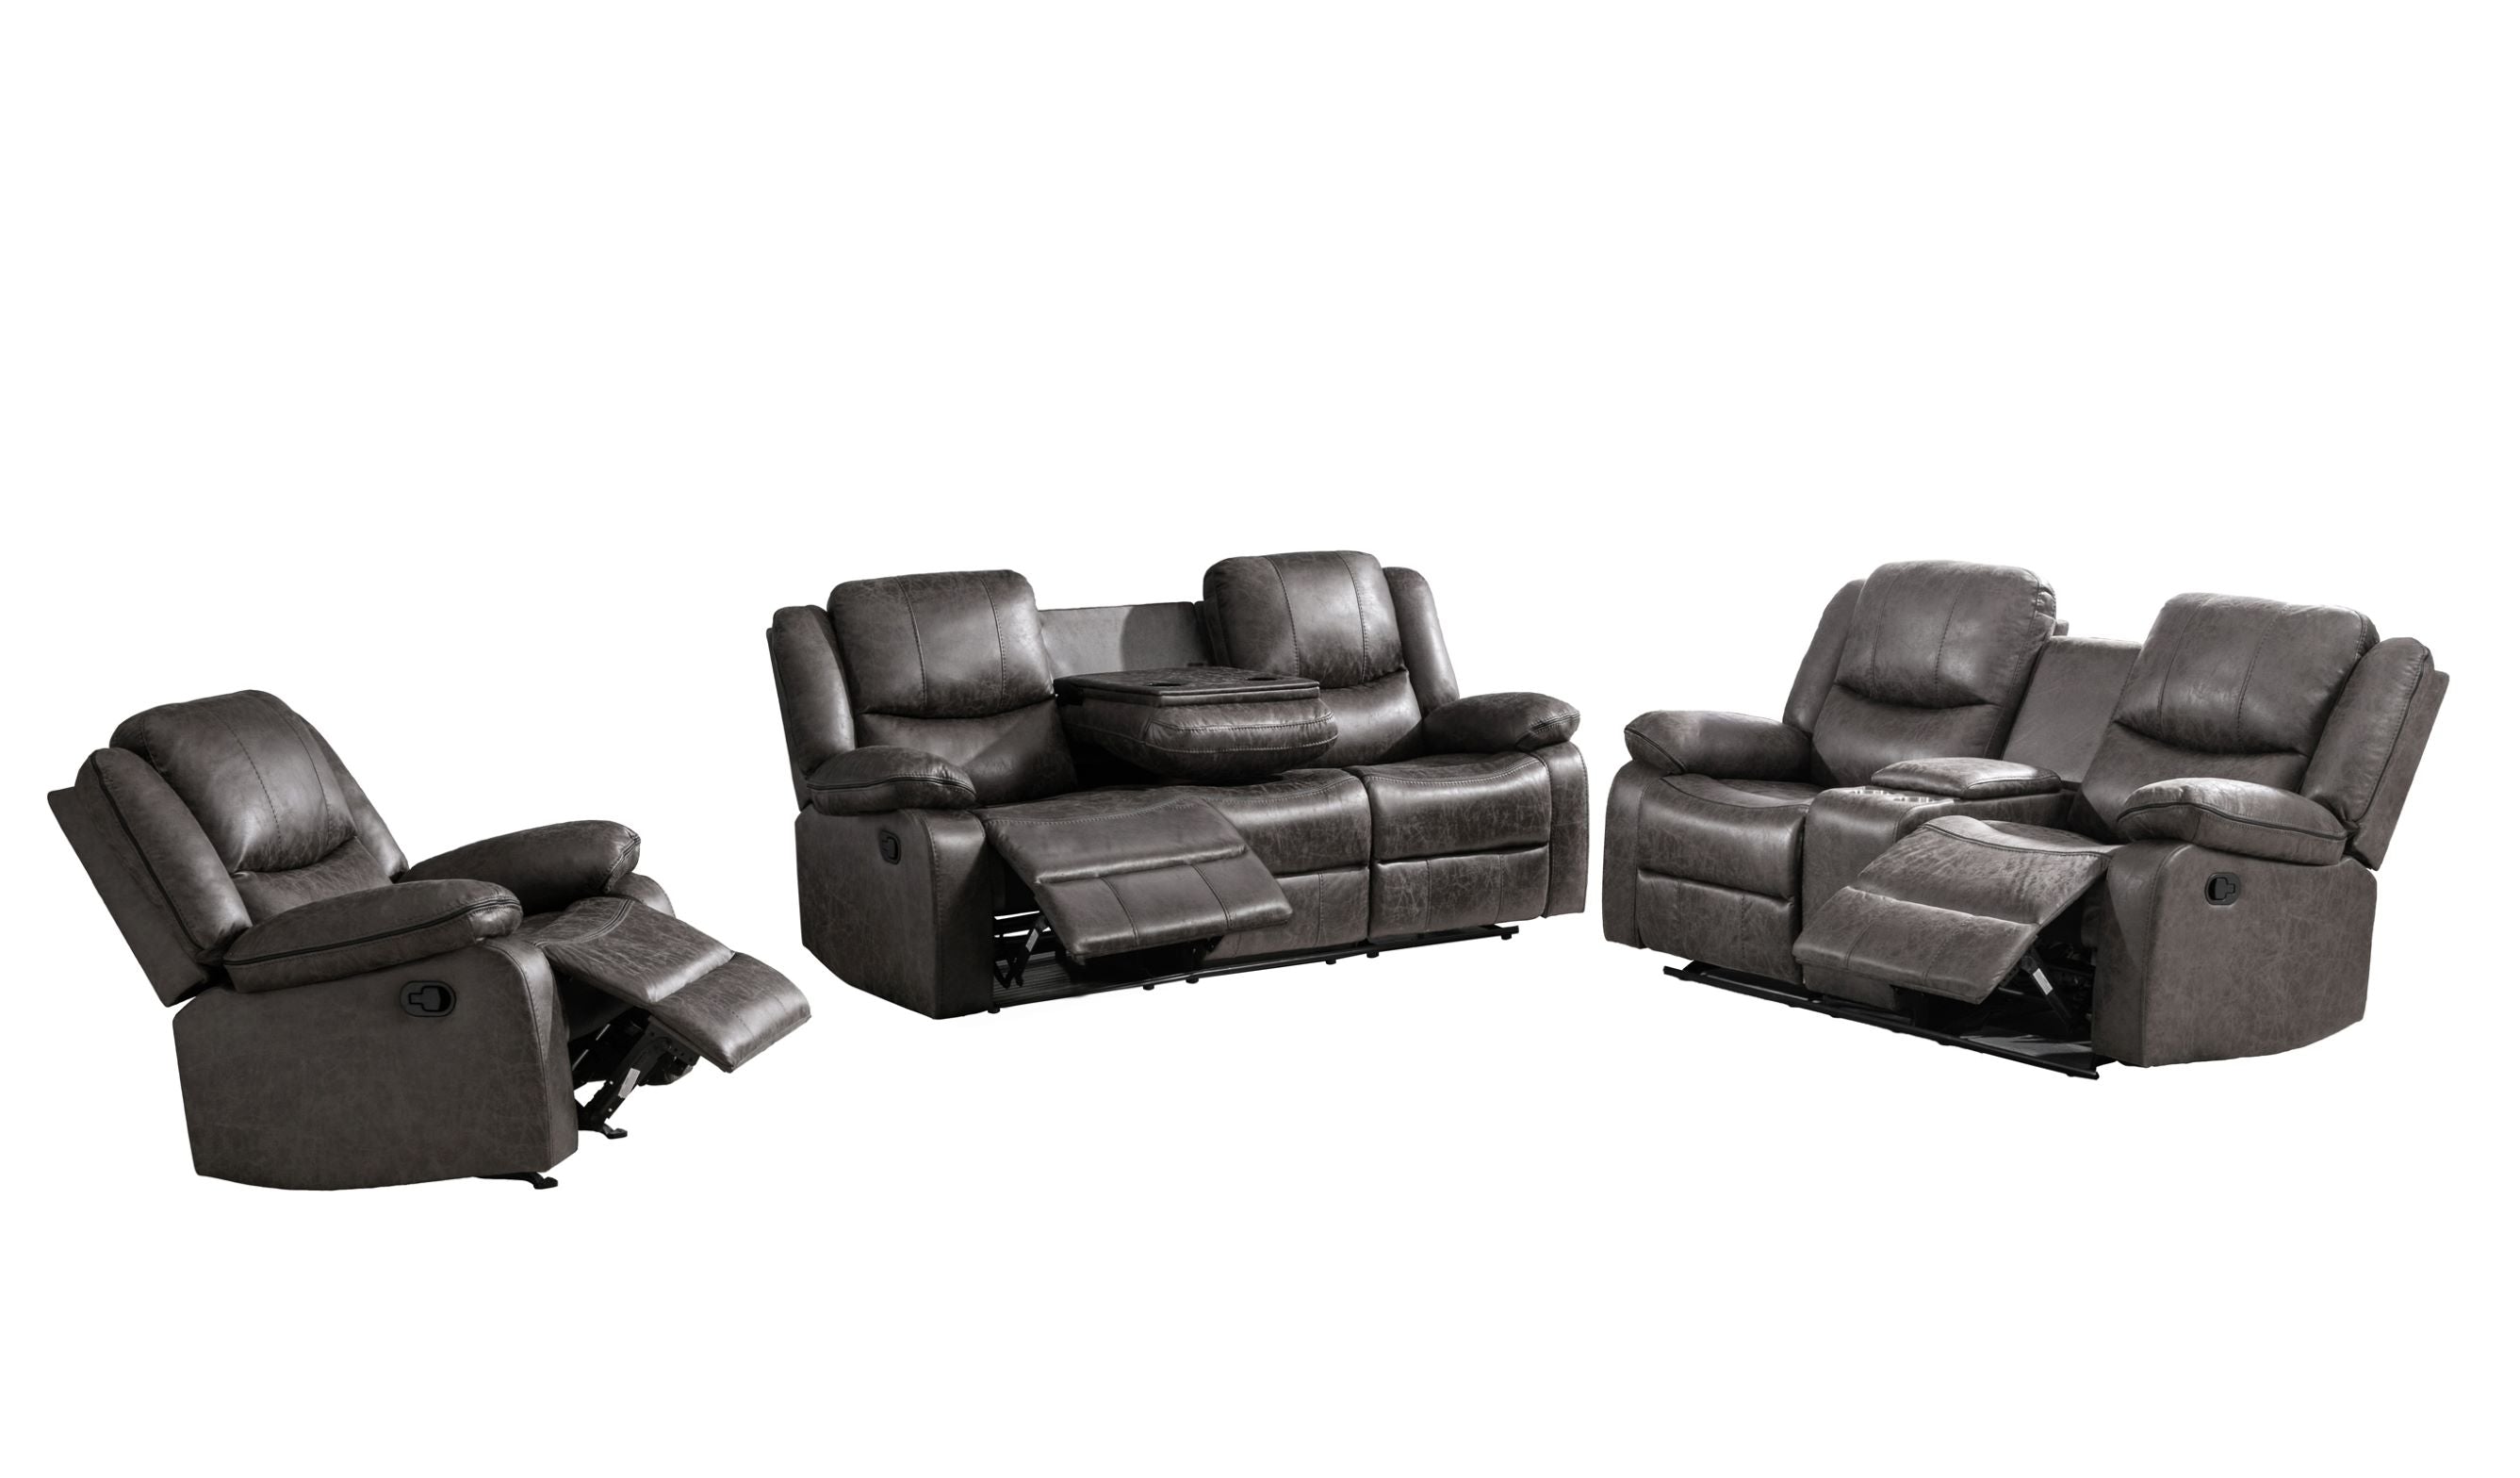 Everett reclining sofa collection 99849GRY